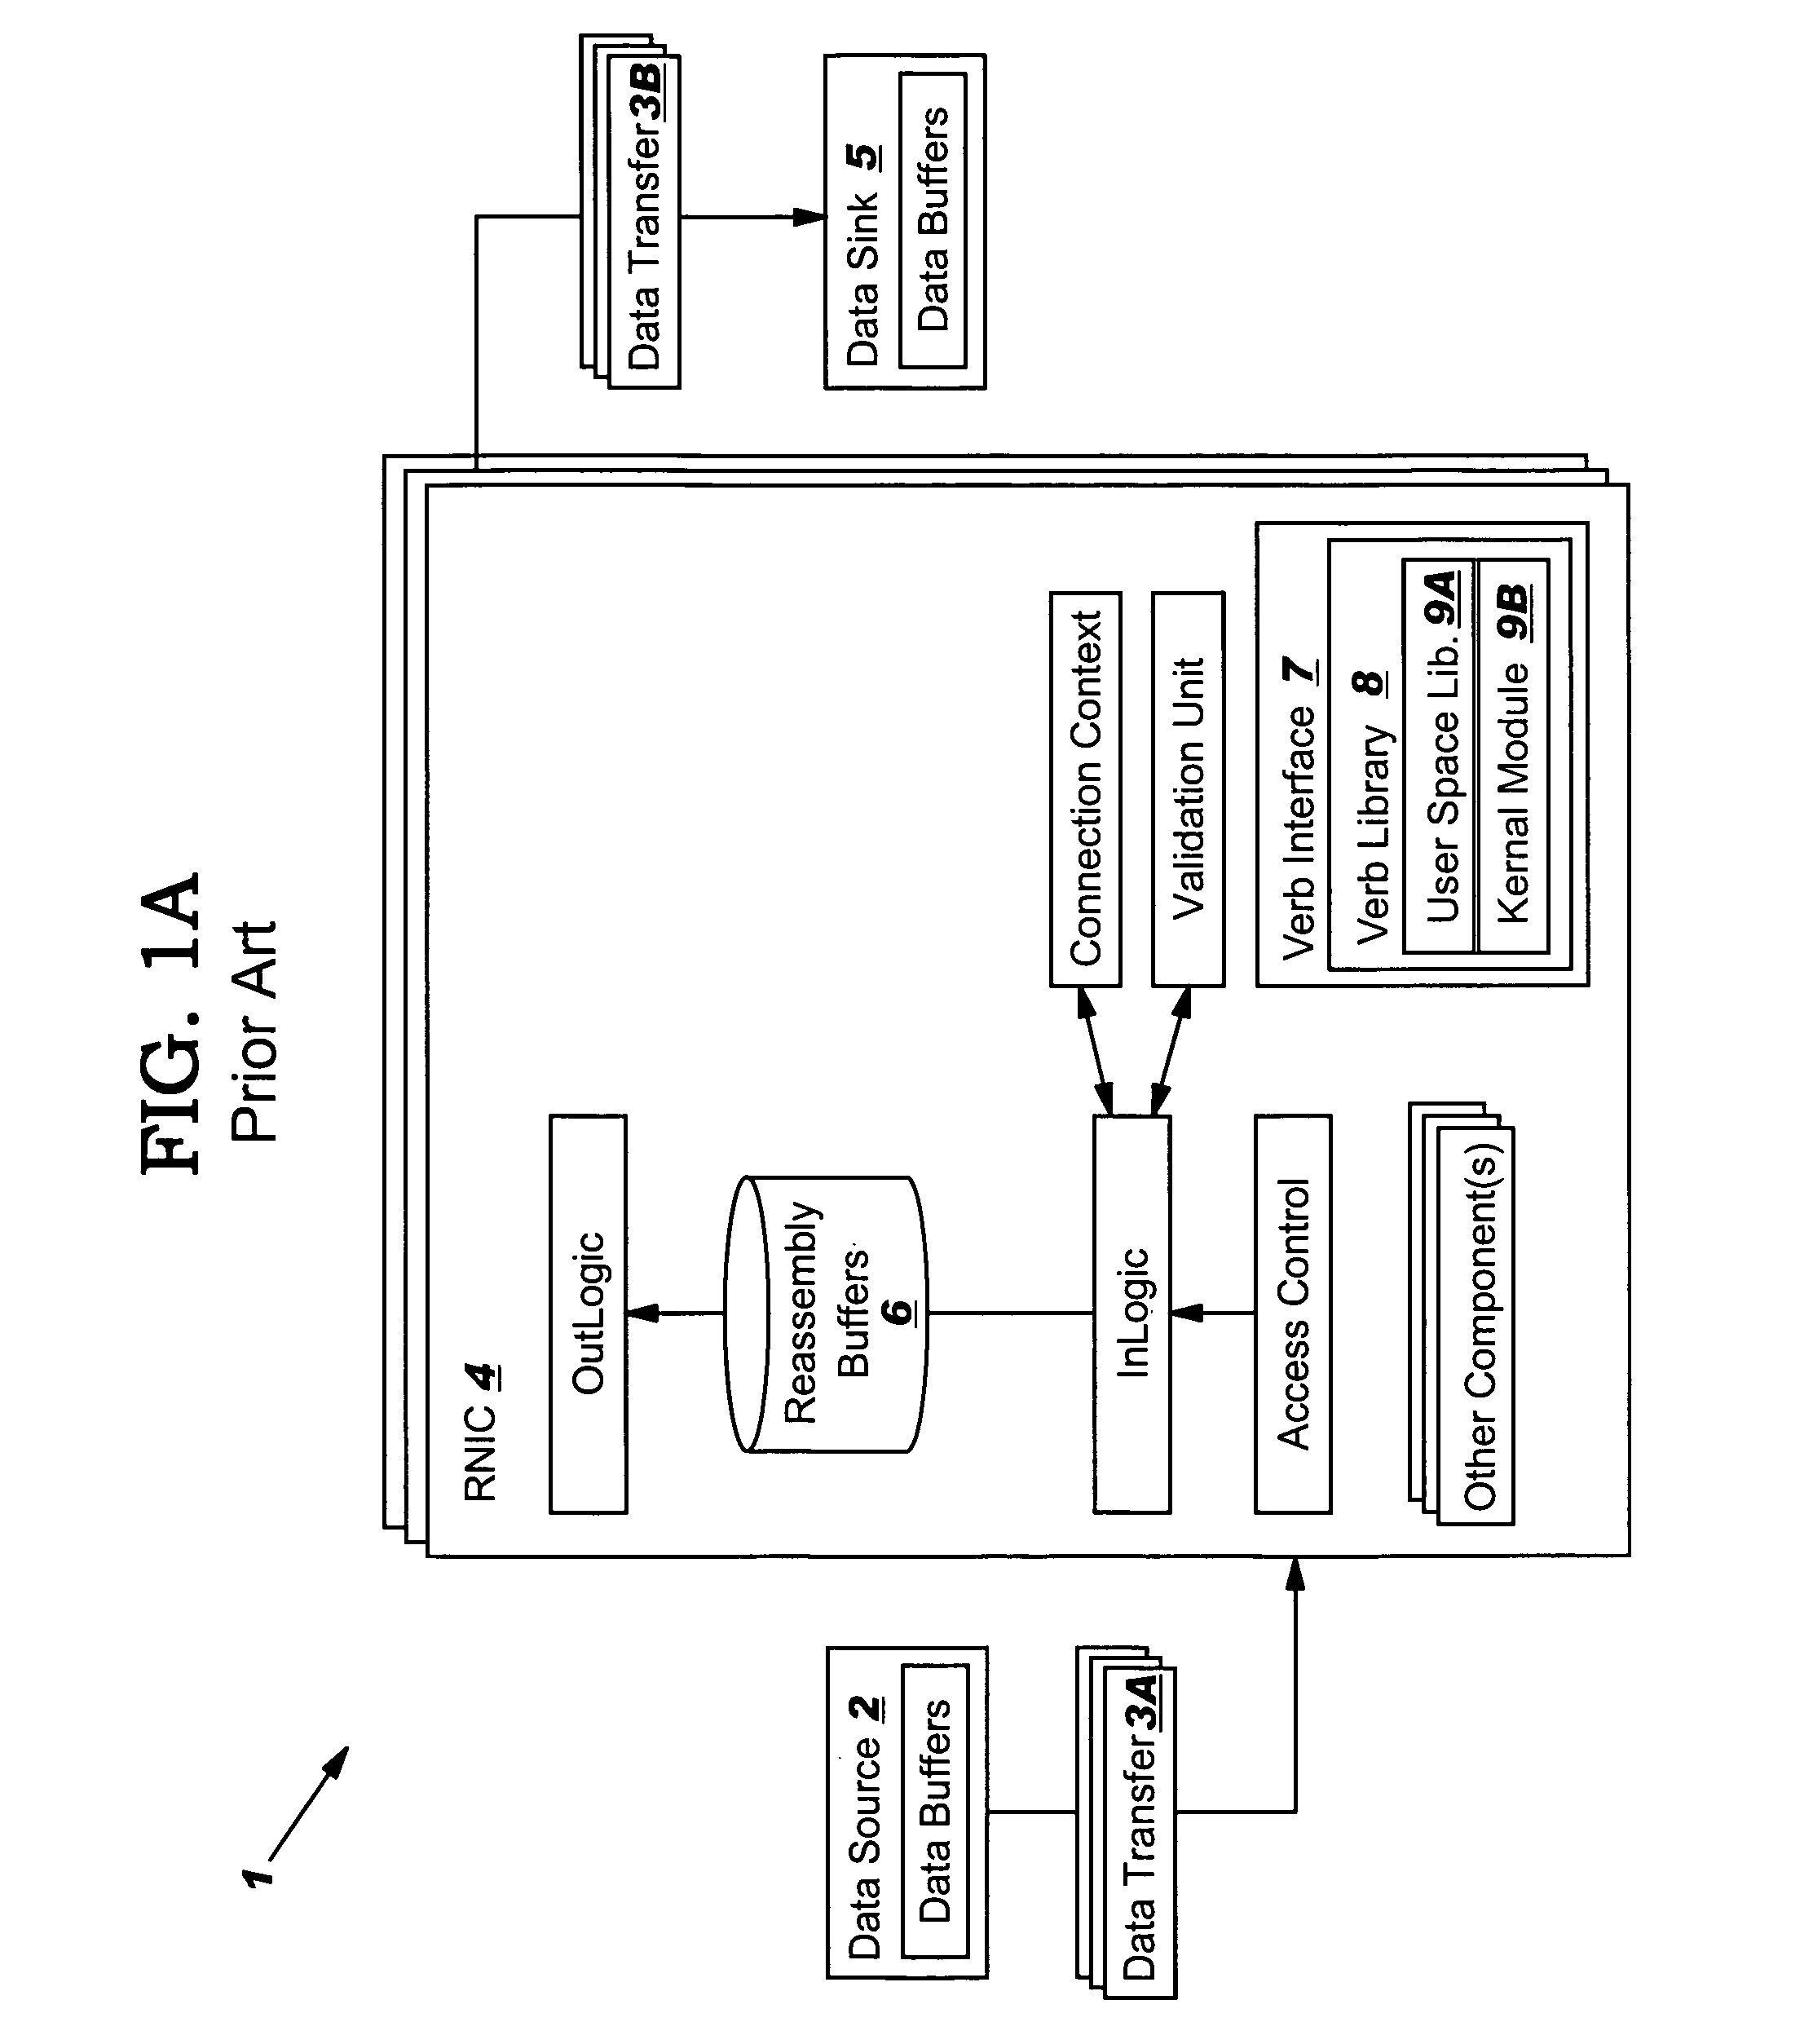 Limiting number of retransmission attempts for data transfer via network interface controller